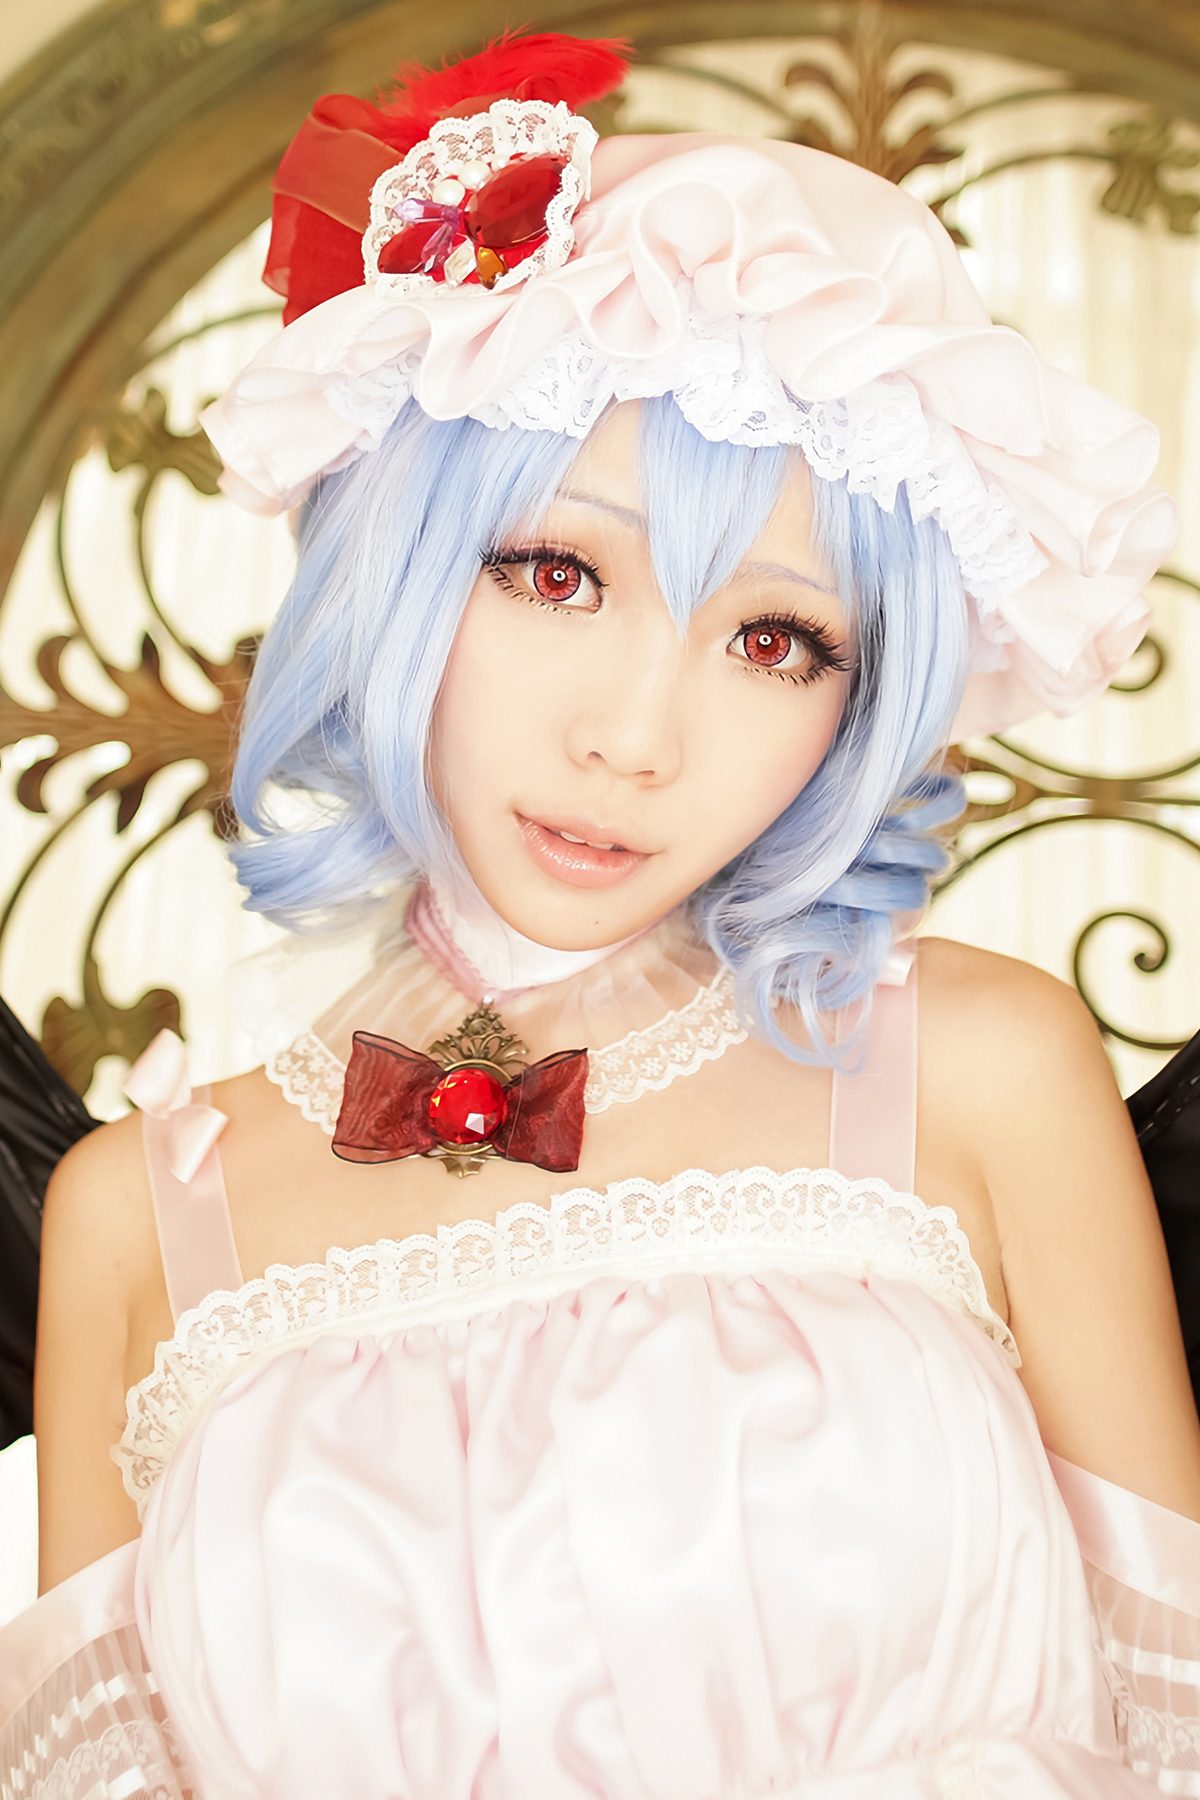 Coser@Ely_eee ElyEE子 – 蕾米莉亚·斯卡雷特 A